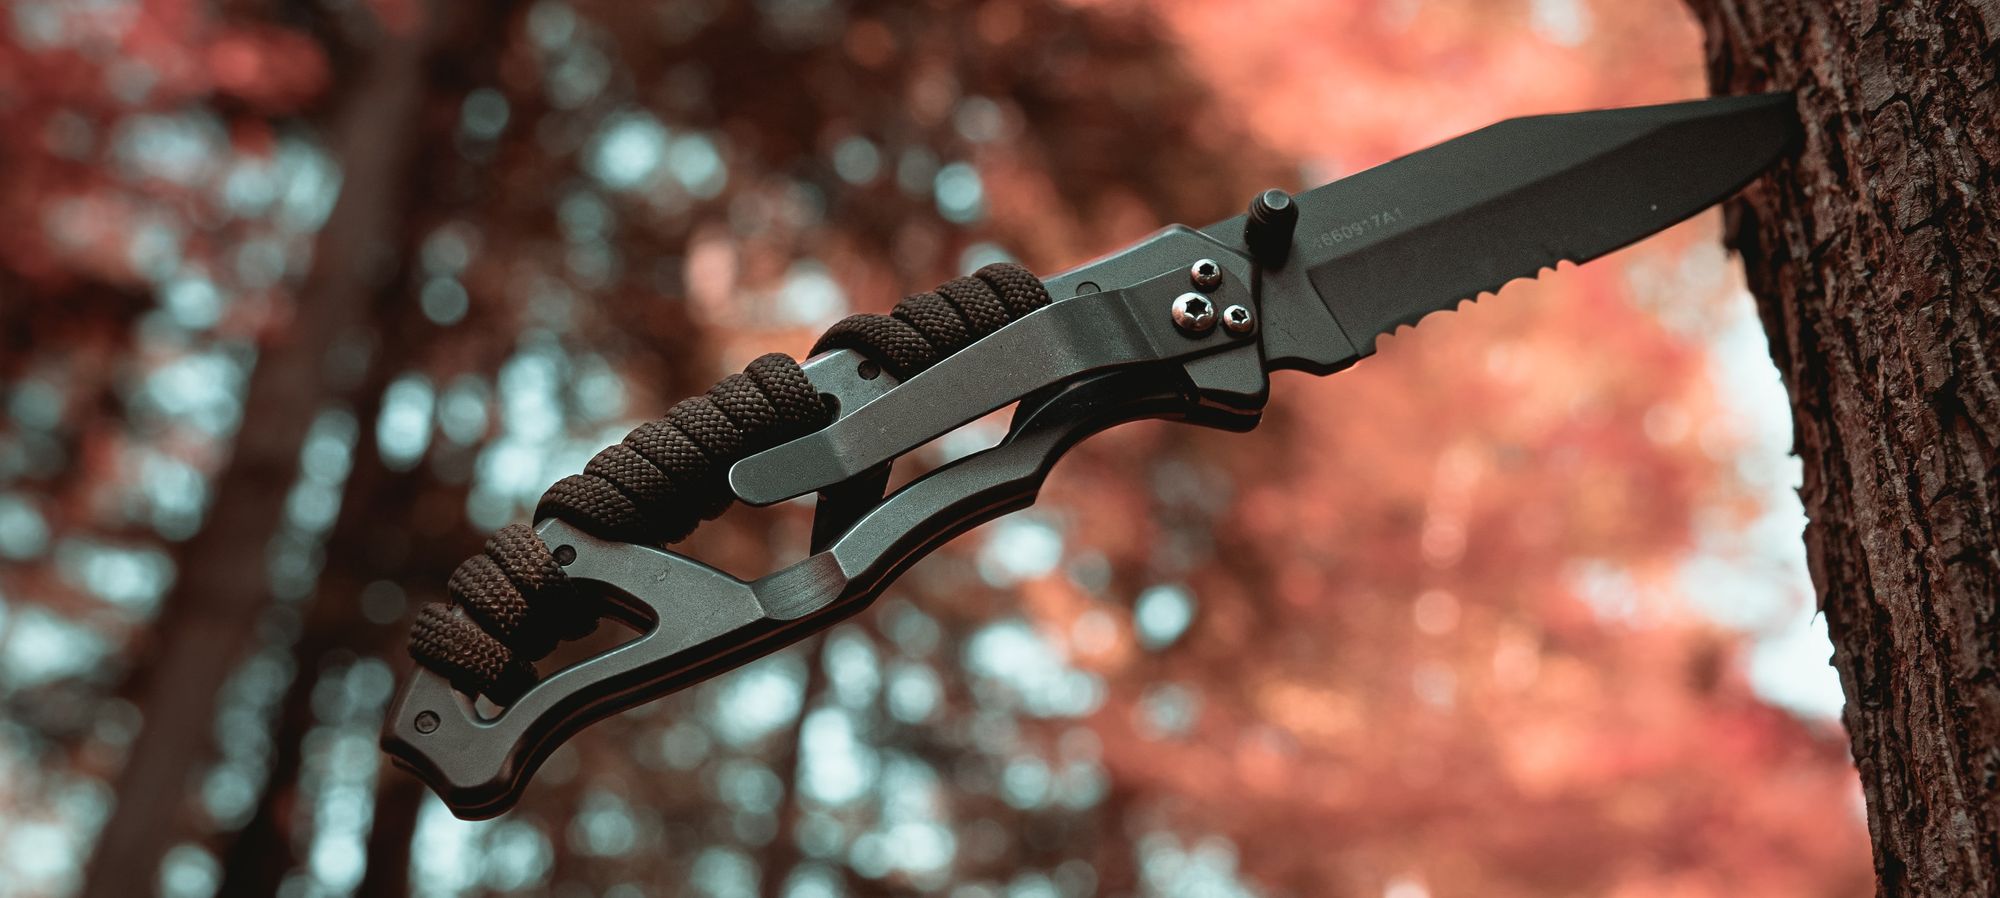 Knife with paracord wrapped handle.